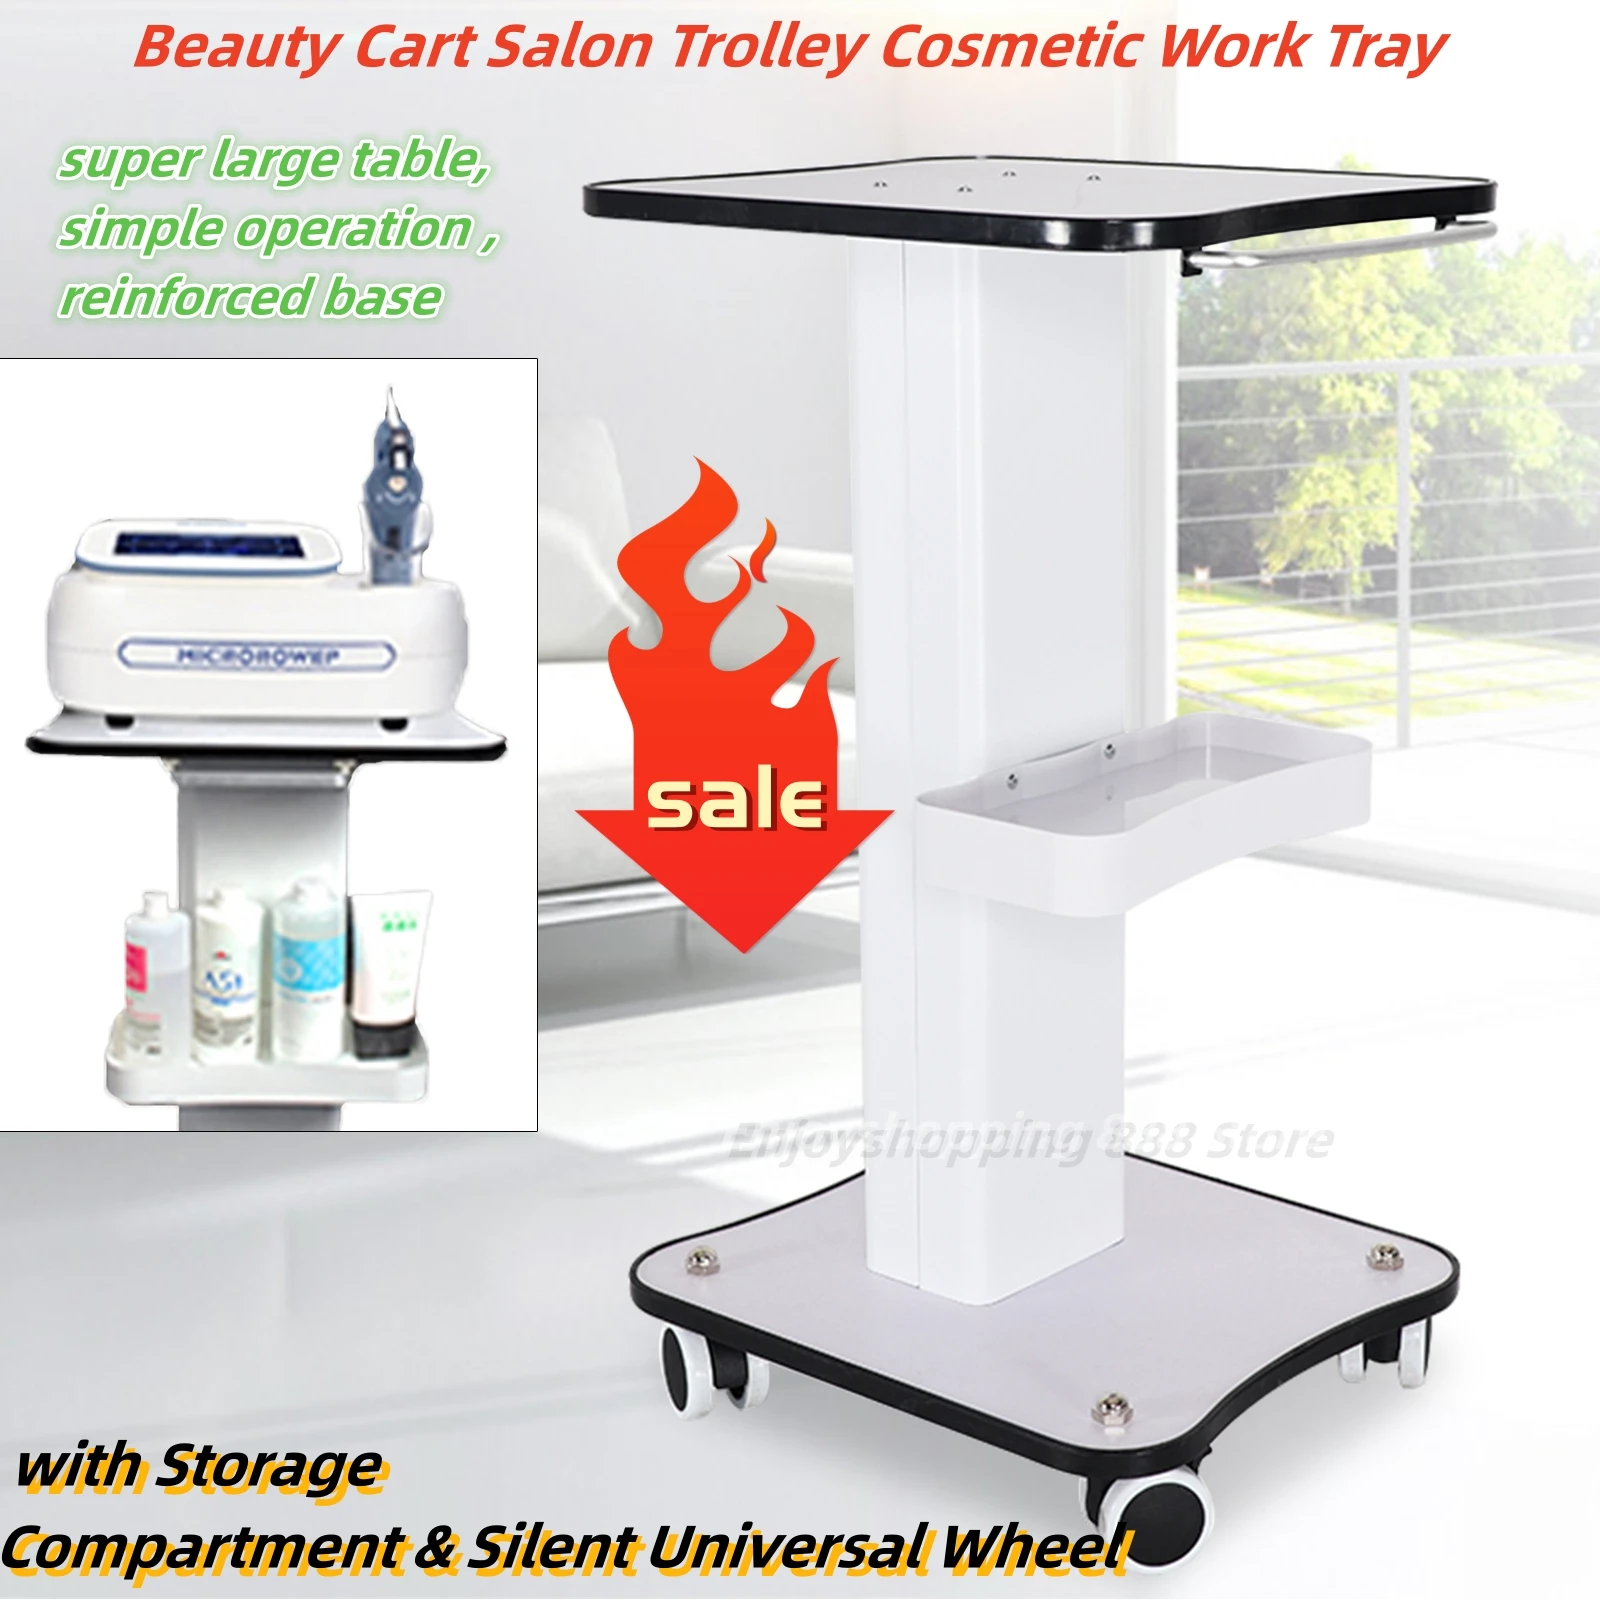 Beauty Cart Salon Trolley Cosmetic Work Tray with Storage Compartment & Silent Universal Wheel flat angle trolley case silent pulley suitcase wheel shock absorbing boarding case wheel cloth box universal universal wheel